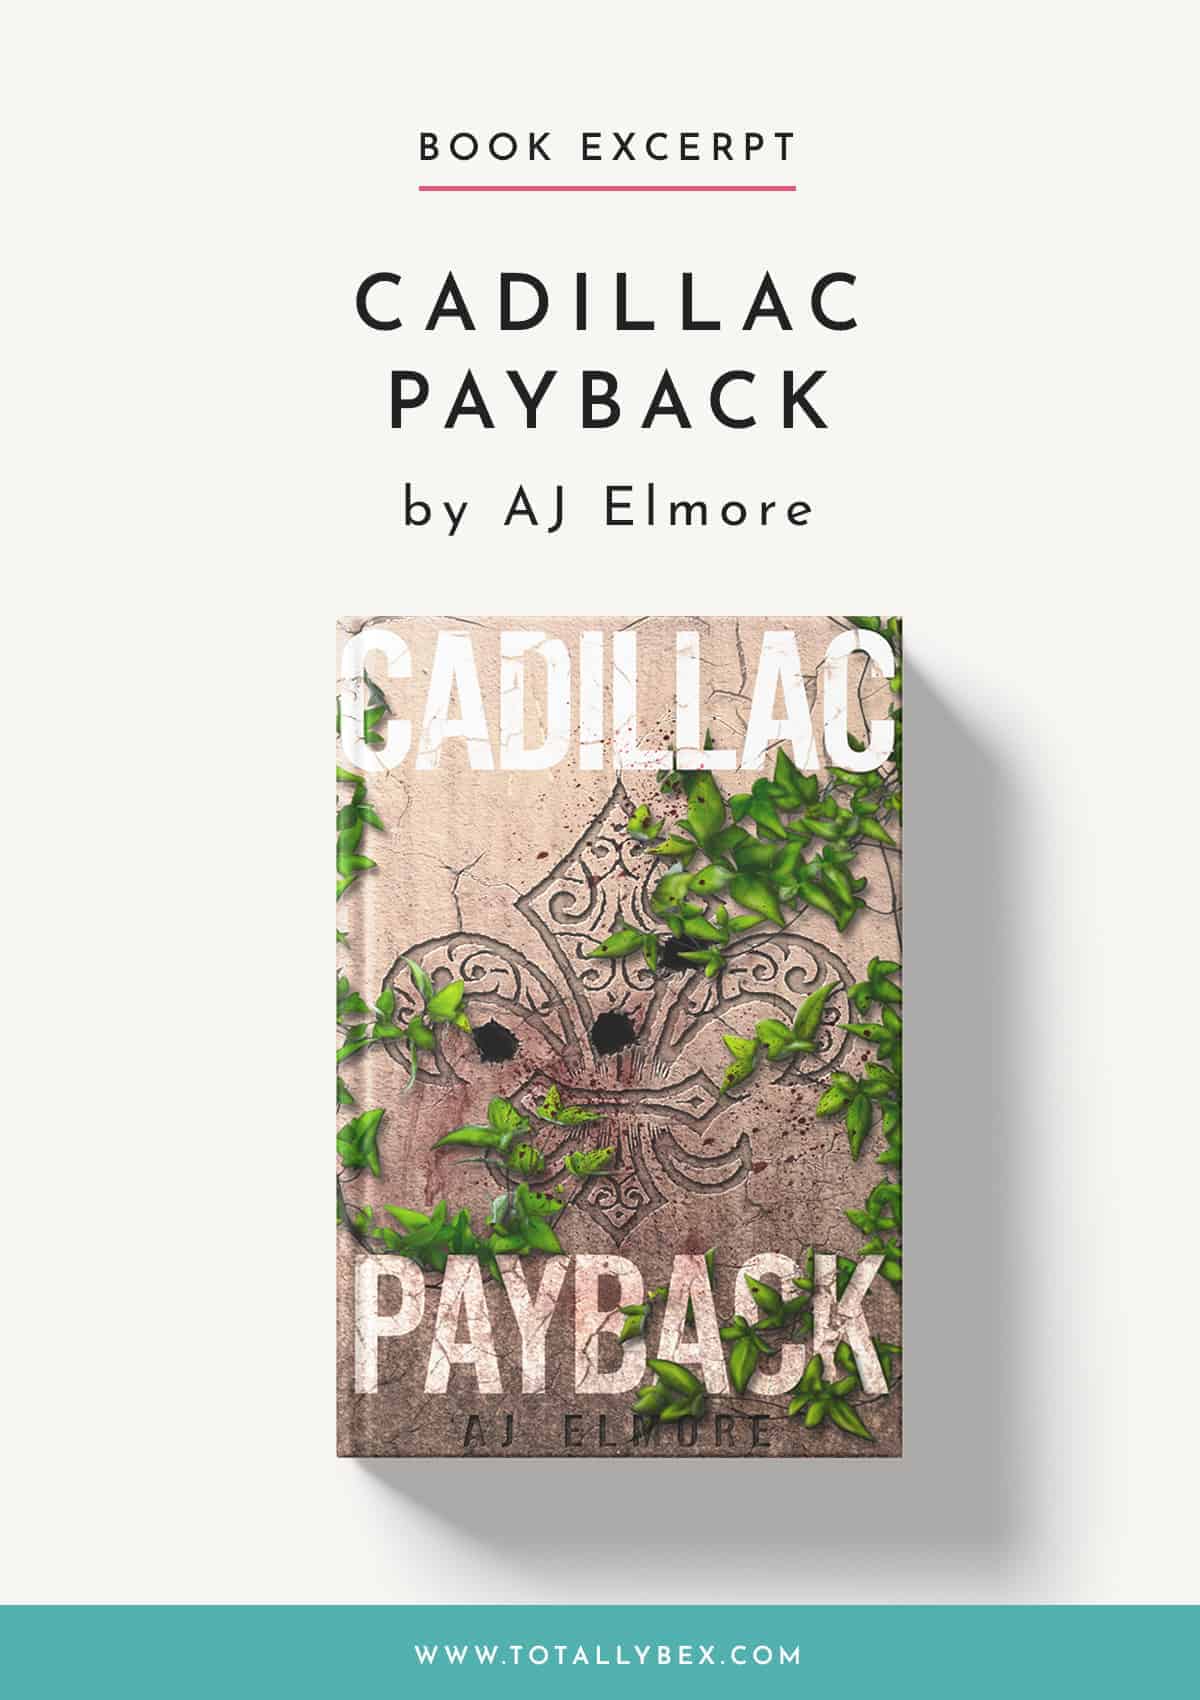 Cadillac Payback by AJ Elmore-Book Excerpt